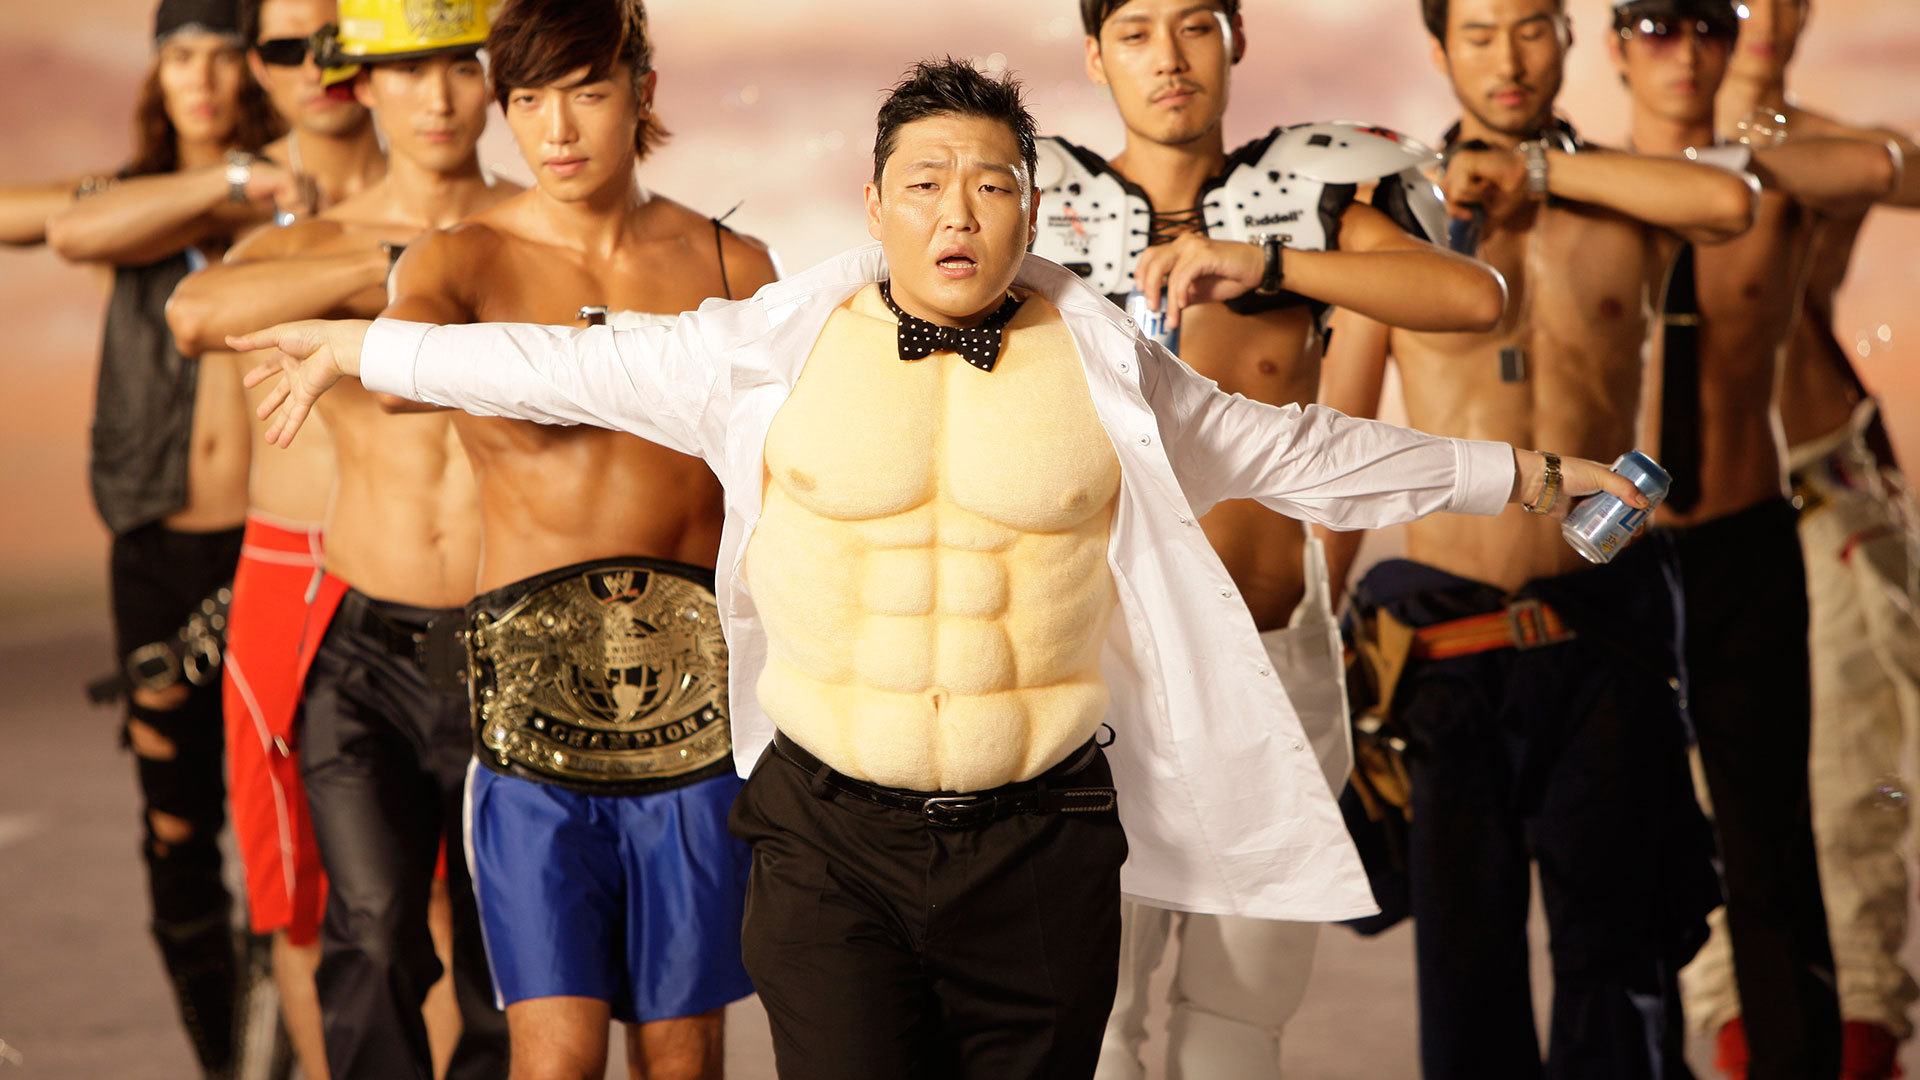 PSY music wallpapers and images - wallpapers, pictures, photos